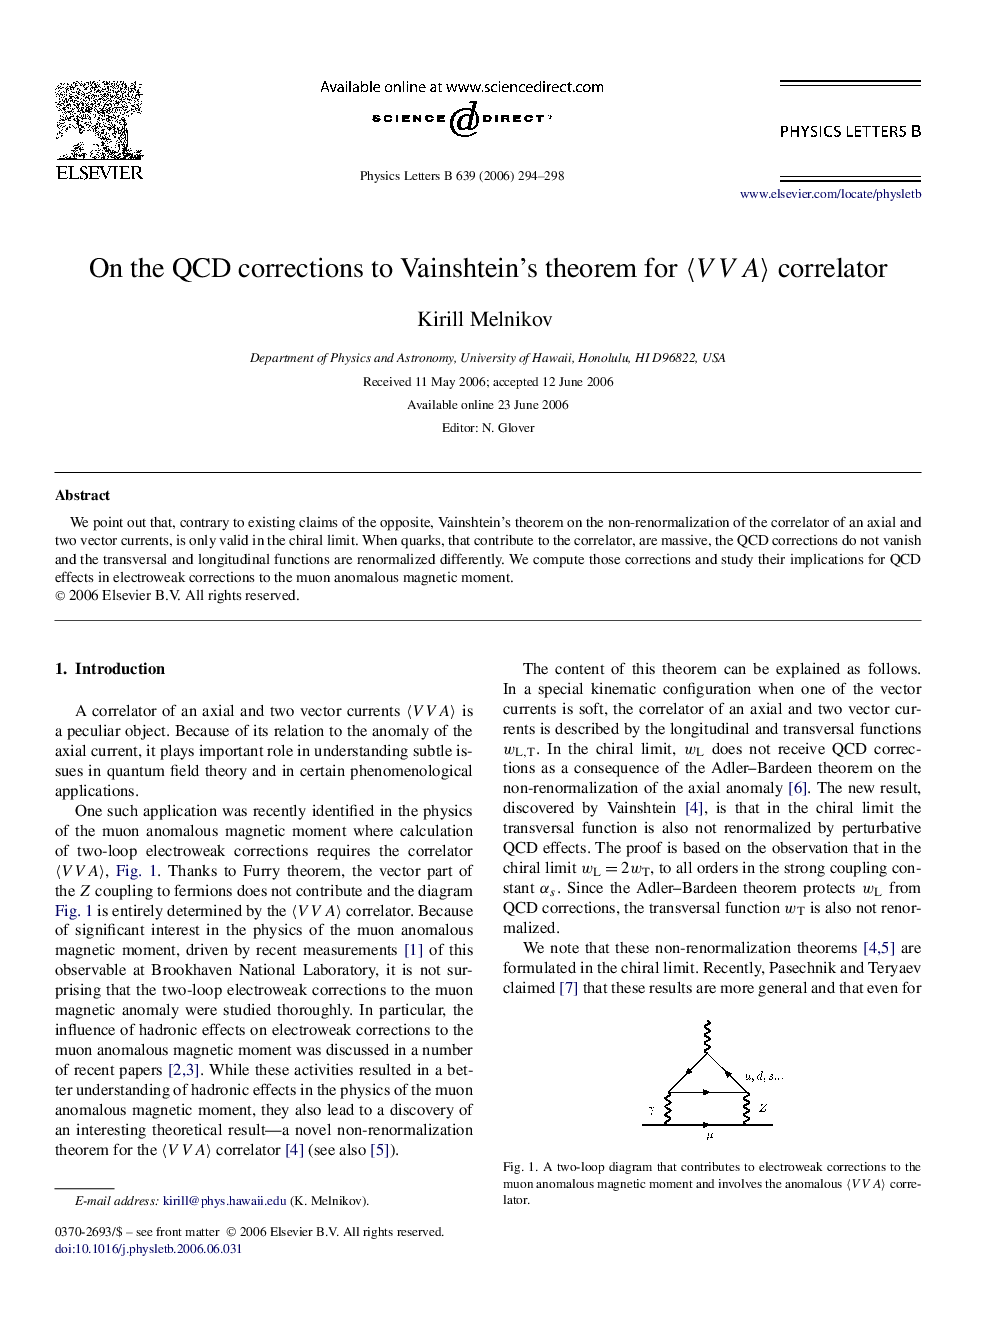 On the QCD corrections to Vainshtein's theorem for ãVVAã correlator